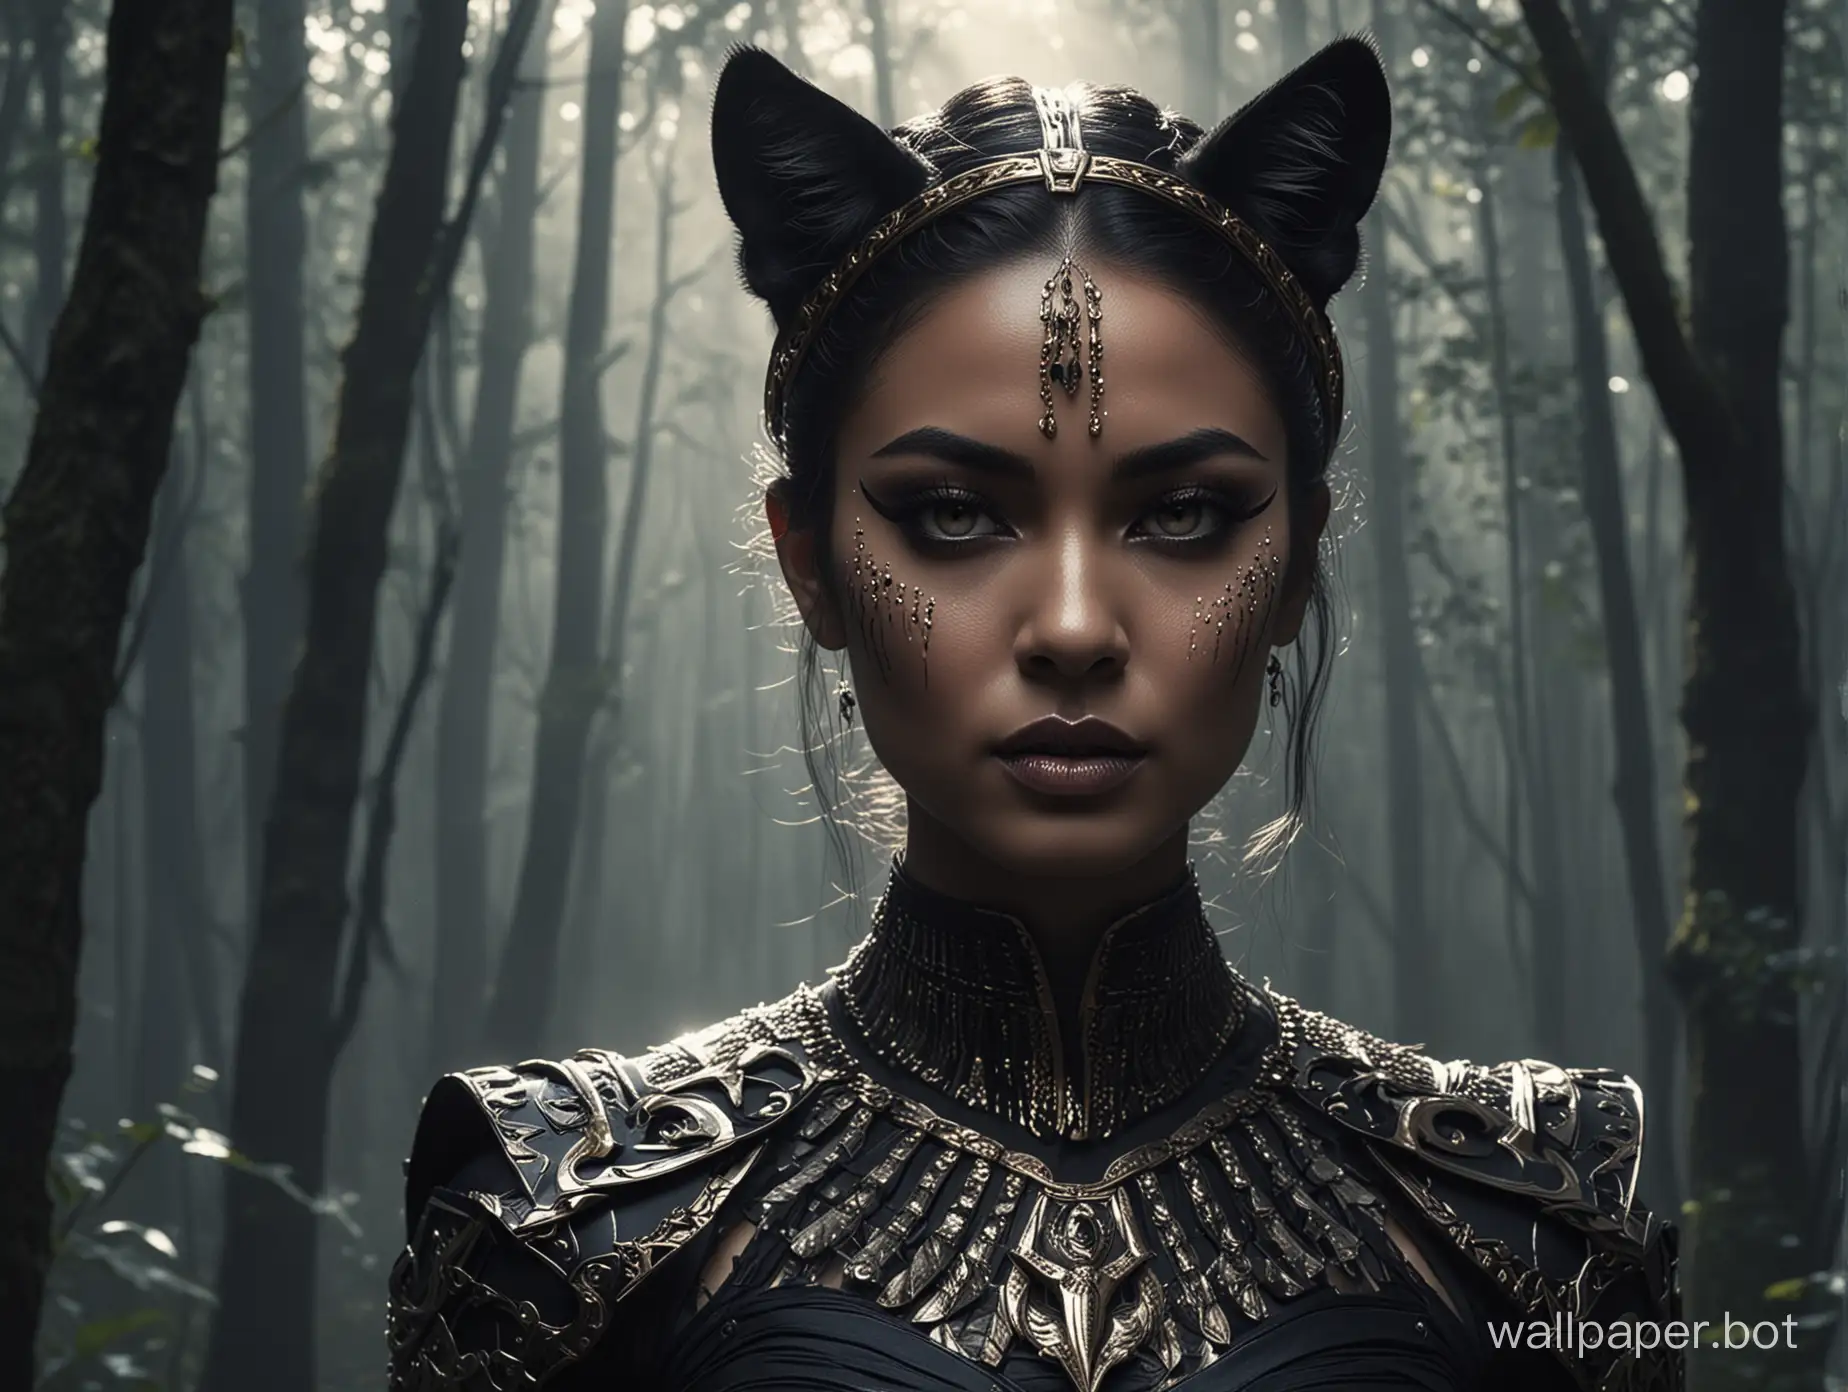 Fierce-Panther-Queen-Warrior-Woman-in-Moonlit-Forest-Poster